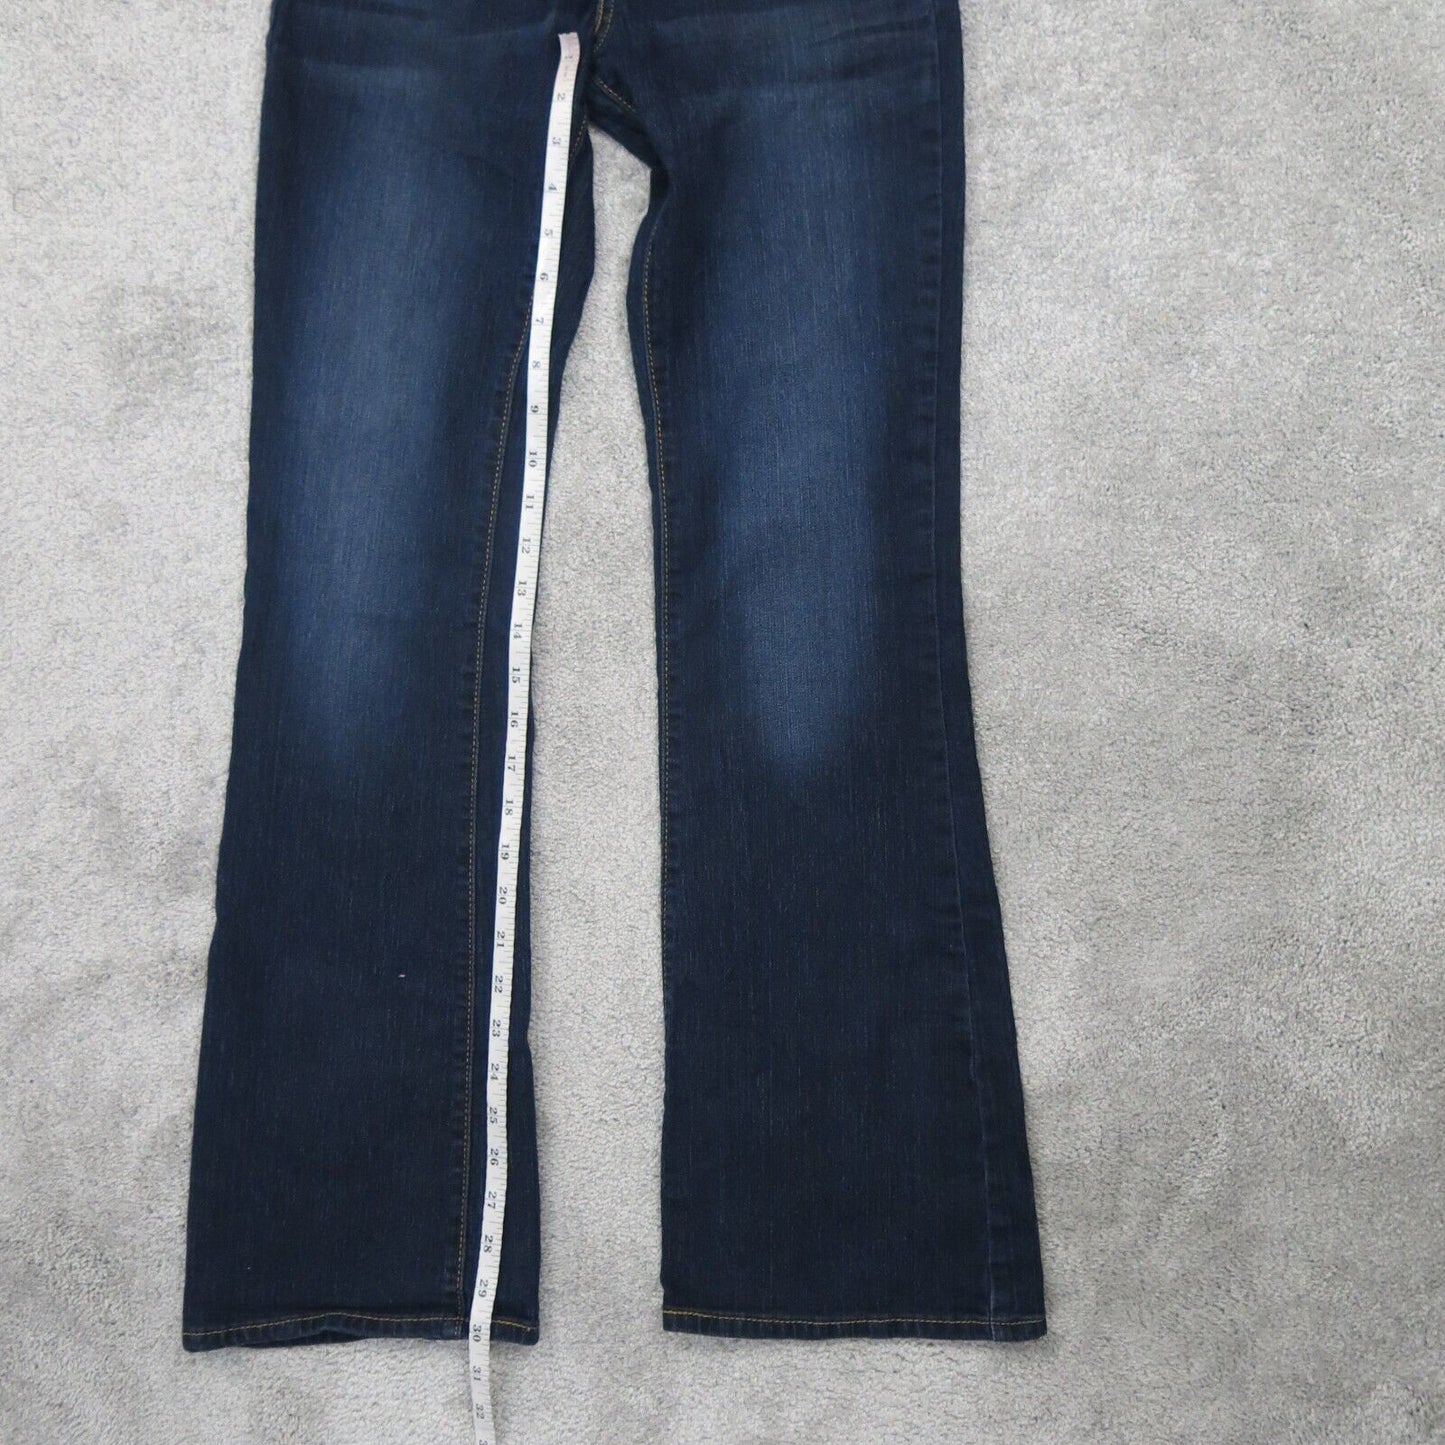 Signature by Levis Womens Modern Boot Cut Jeans Mid Rise Flat Front Blue W26xL32